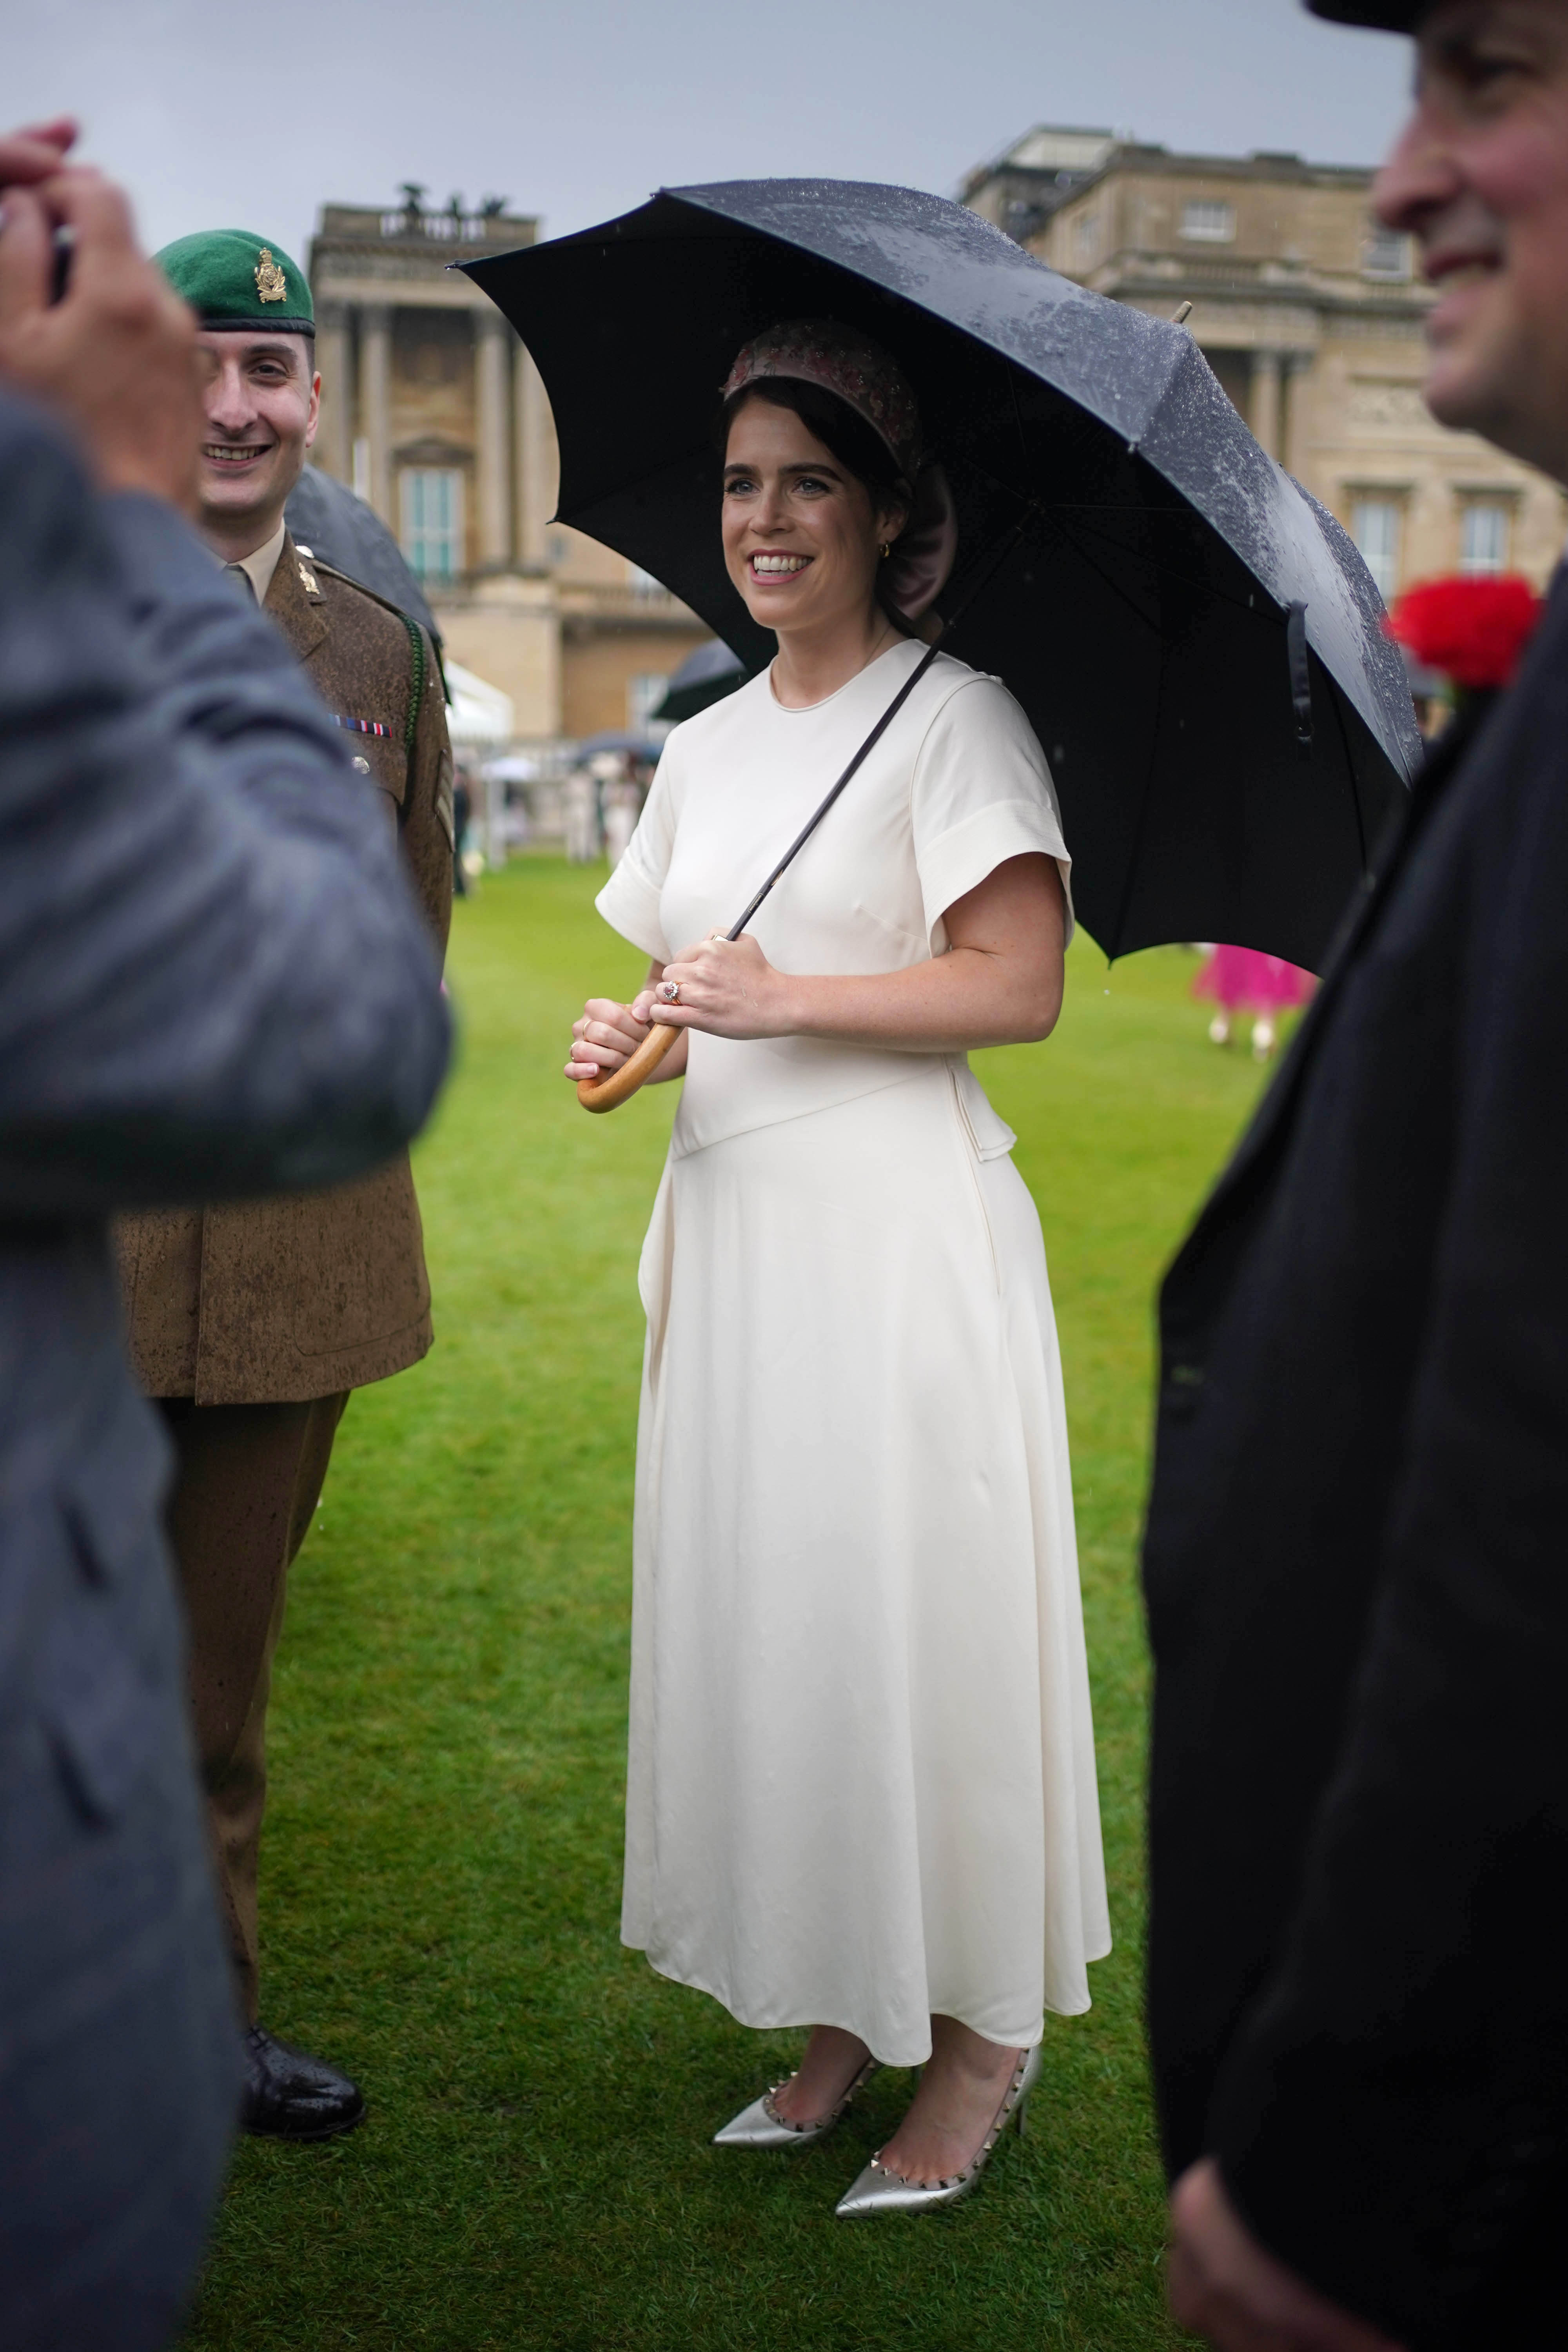 Princess Eugenie said she was ‘delighted’ to support her family at this week’s garden party